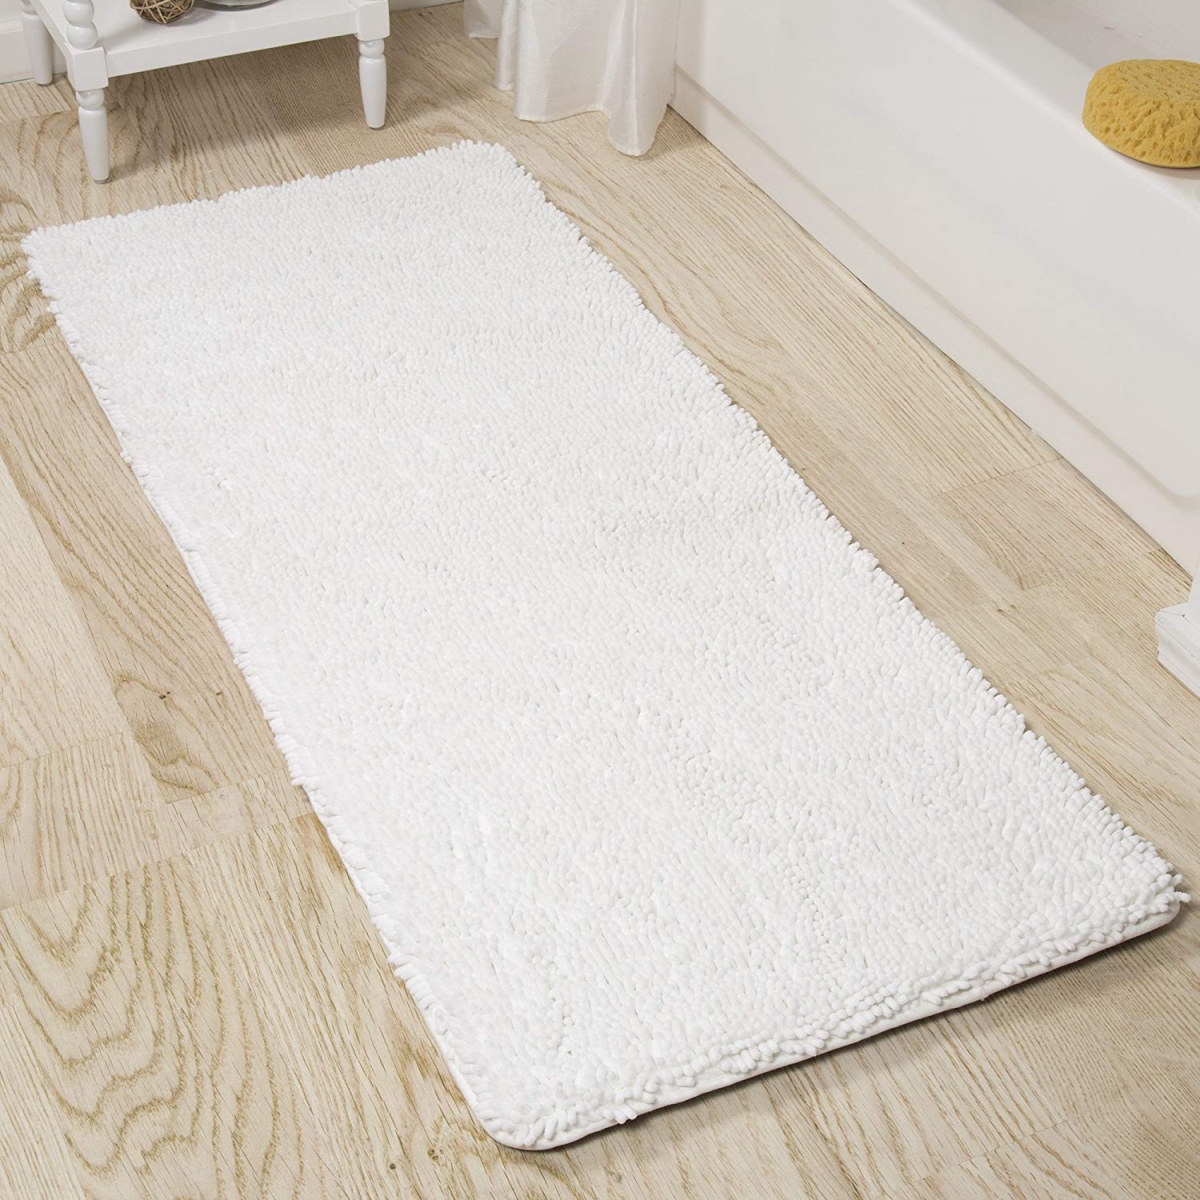 Picture of Bedford Home 67A-99148 Memory Foam Shag Bath Mat, 2 ft. by 5 ft. - White